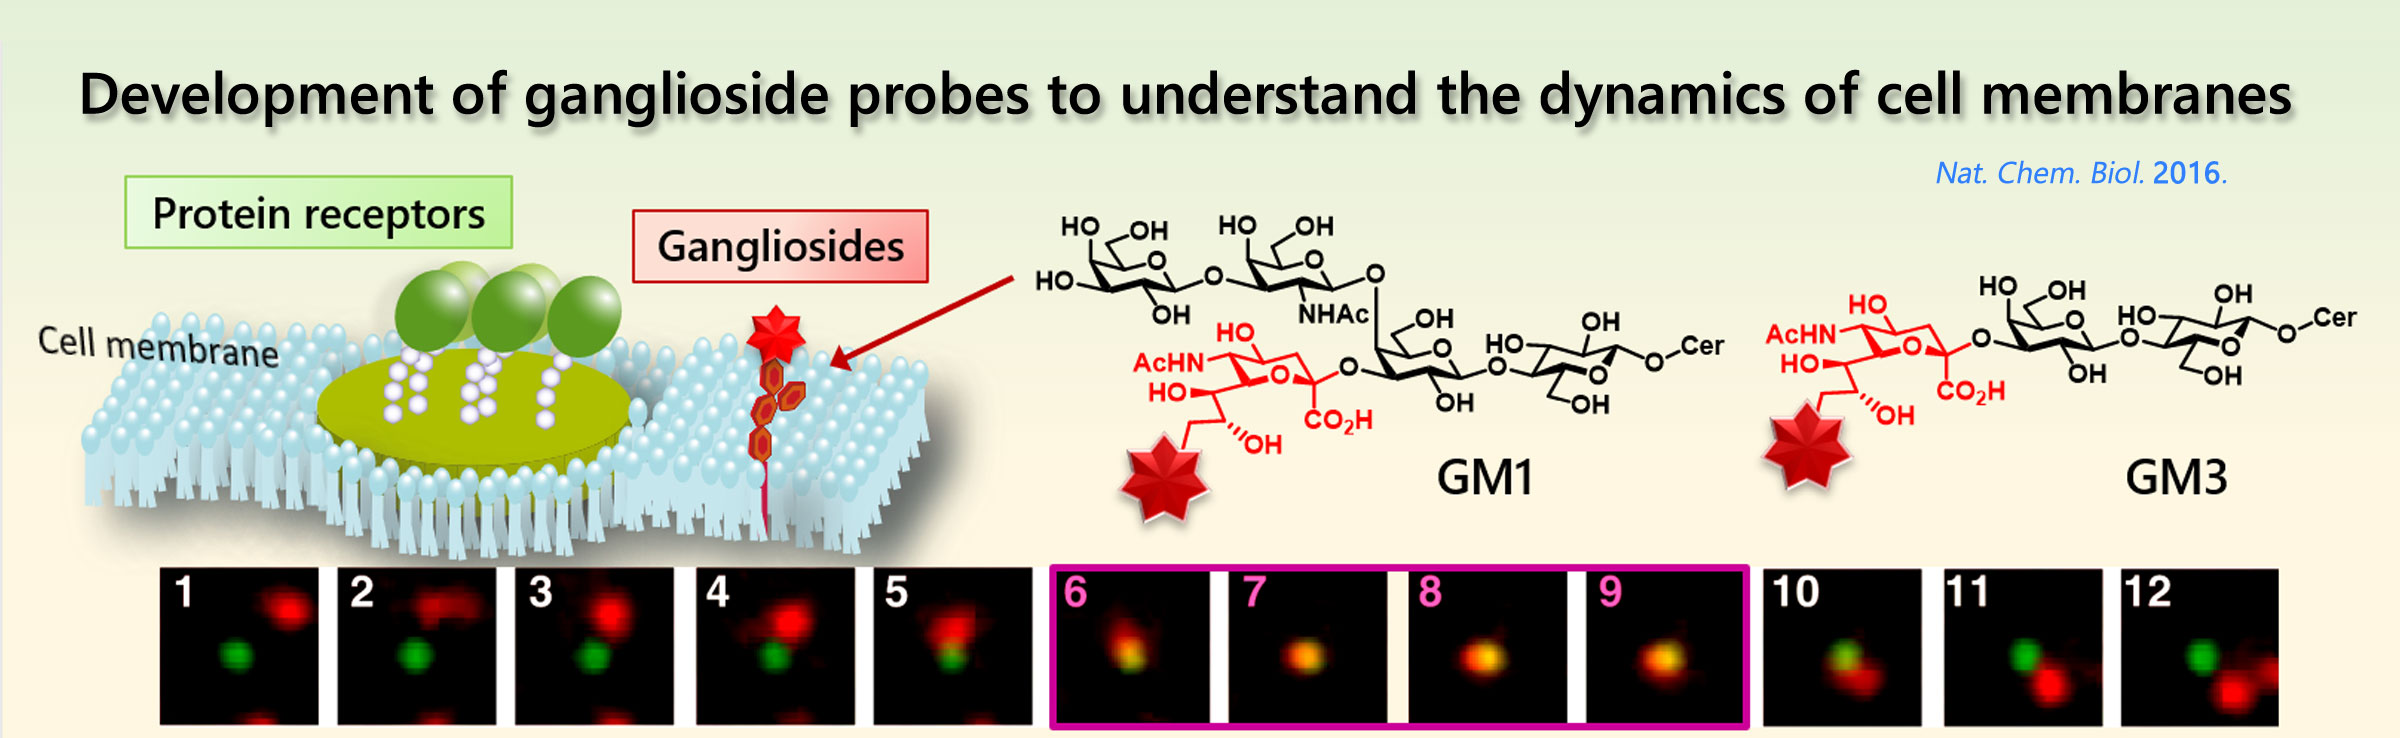 Development of ganglioside probes to understand the dynamics of cell membranes